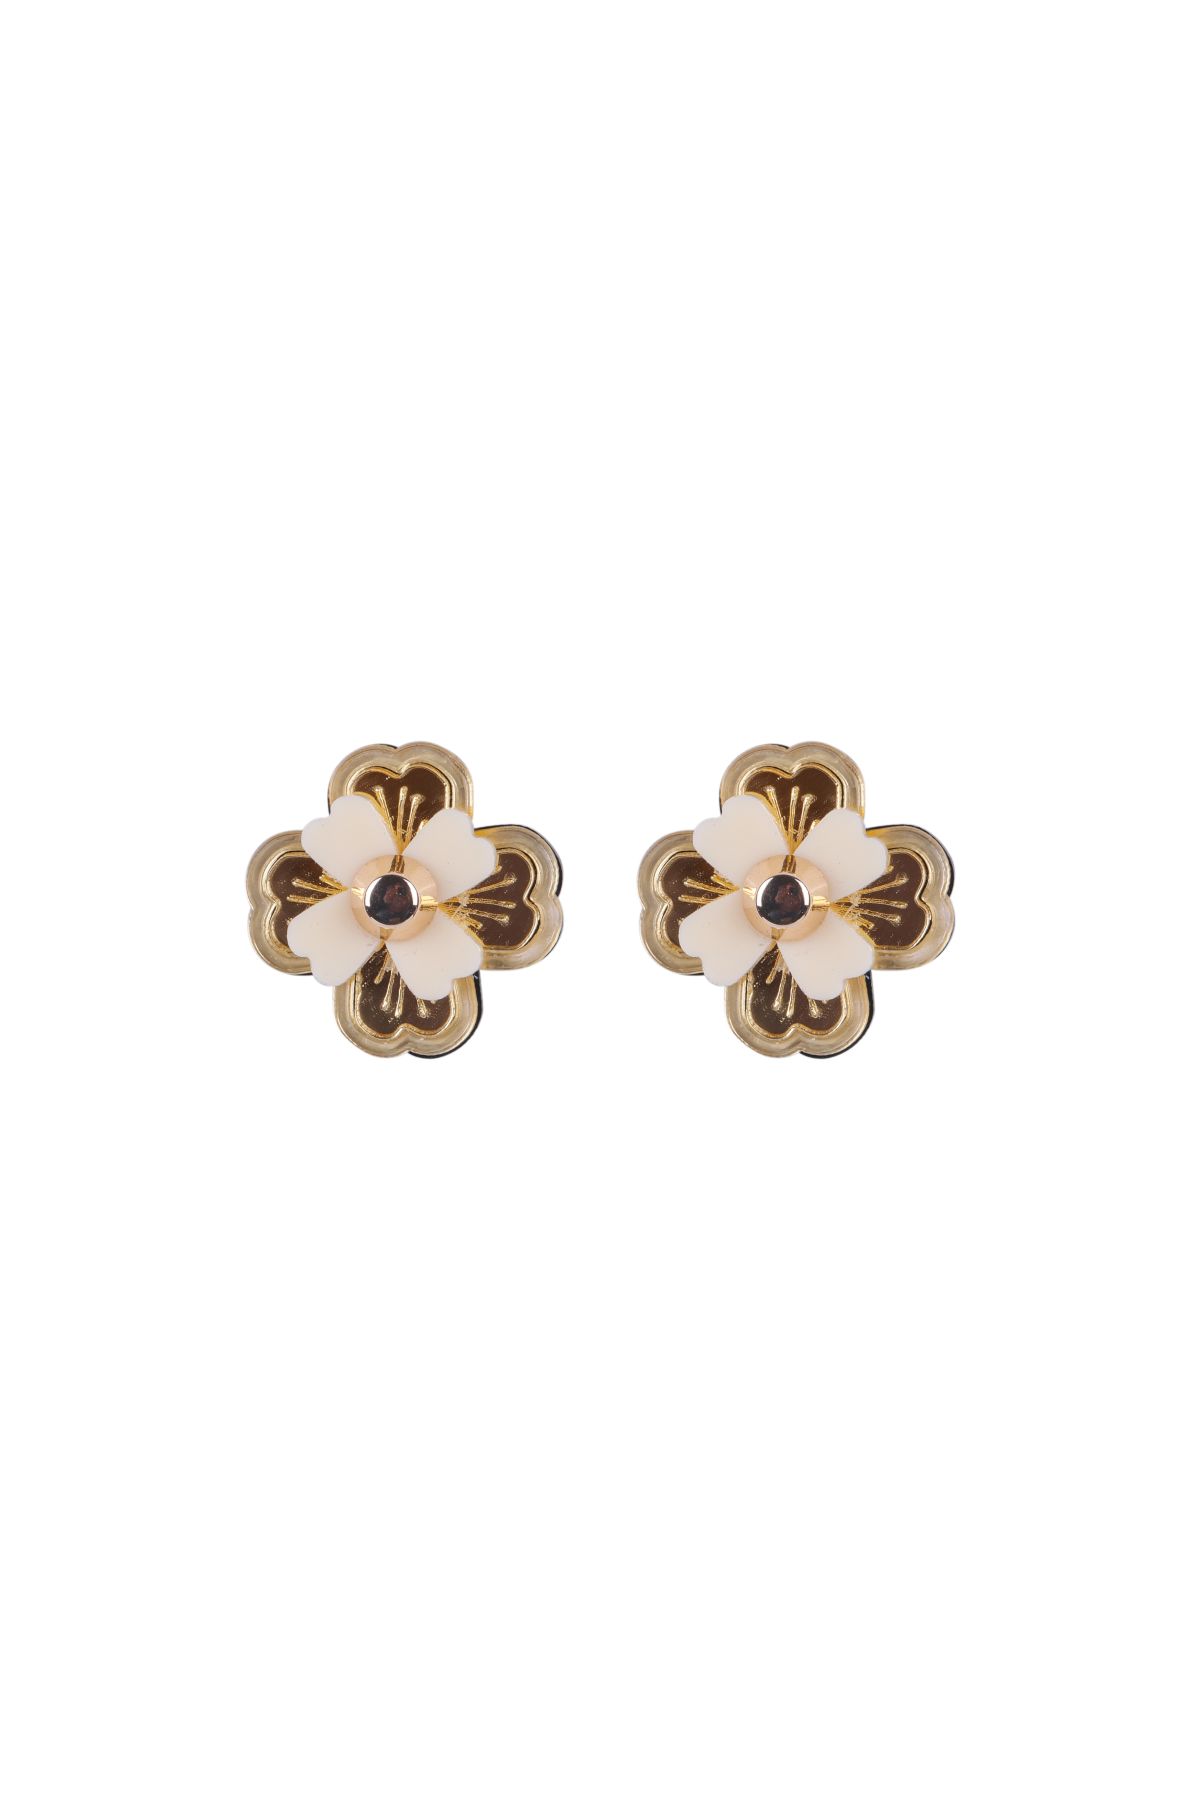 OYSTER STUDS